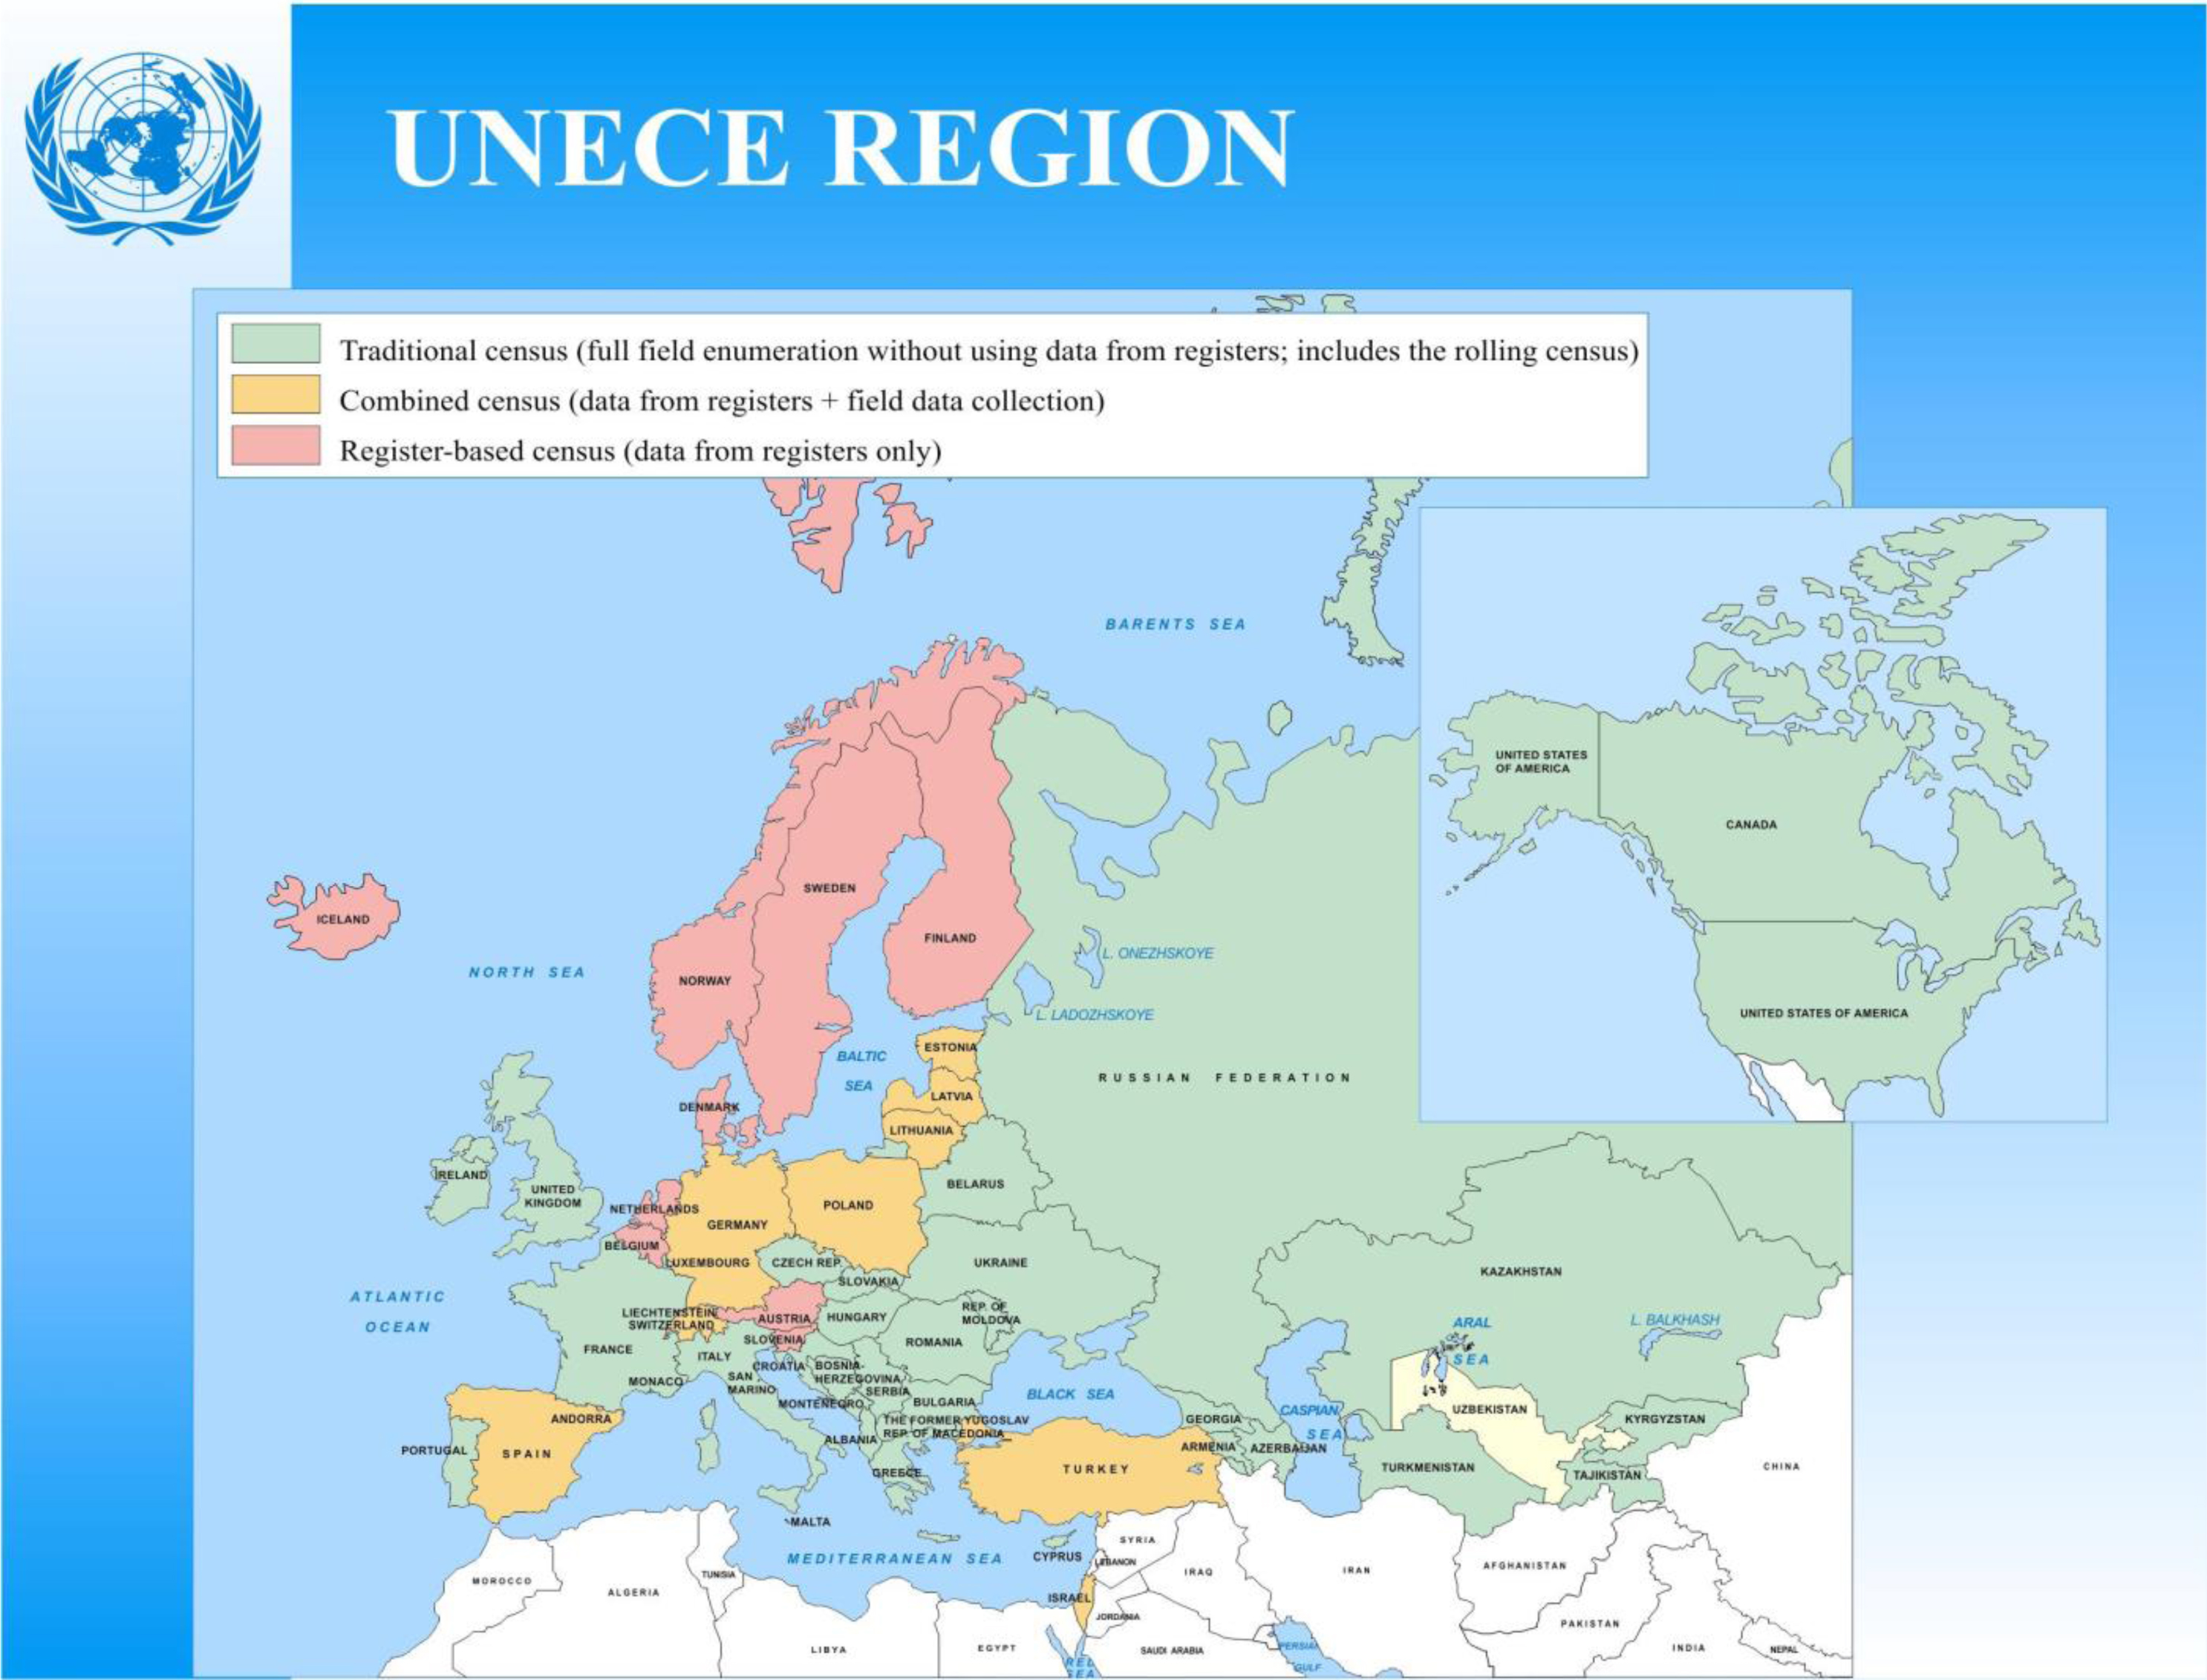 Census methods in UNECE countries. Source: [10].